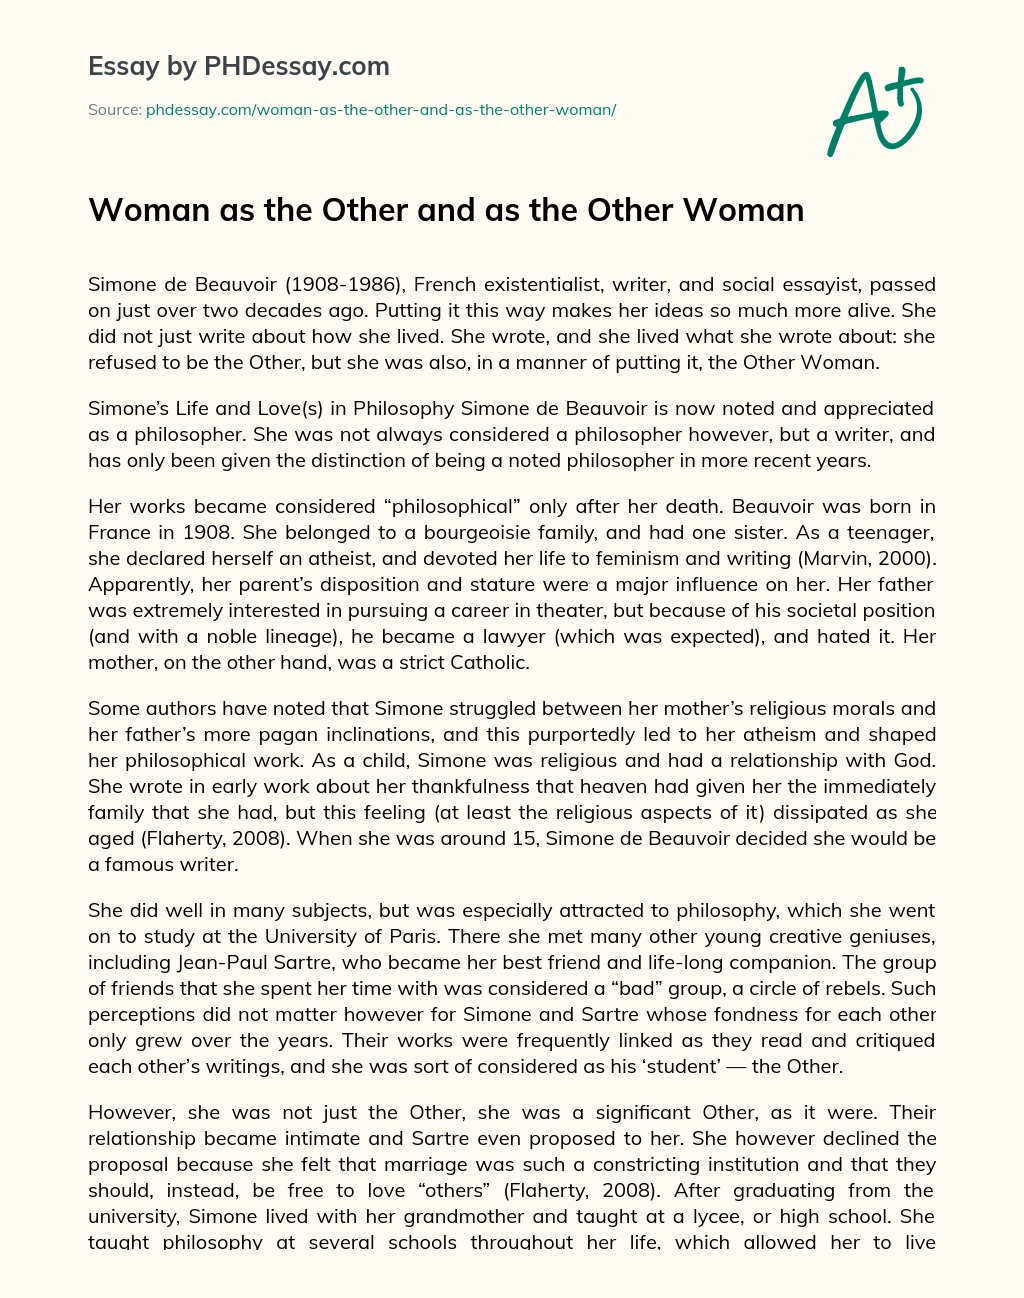 Woman as the Other and as the Other Woman essay